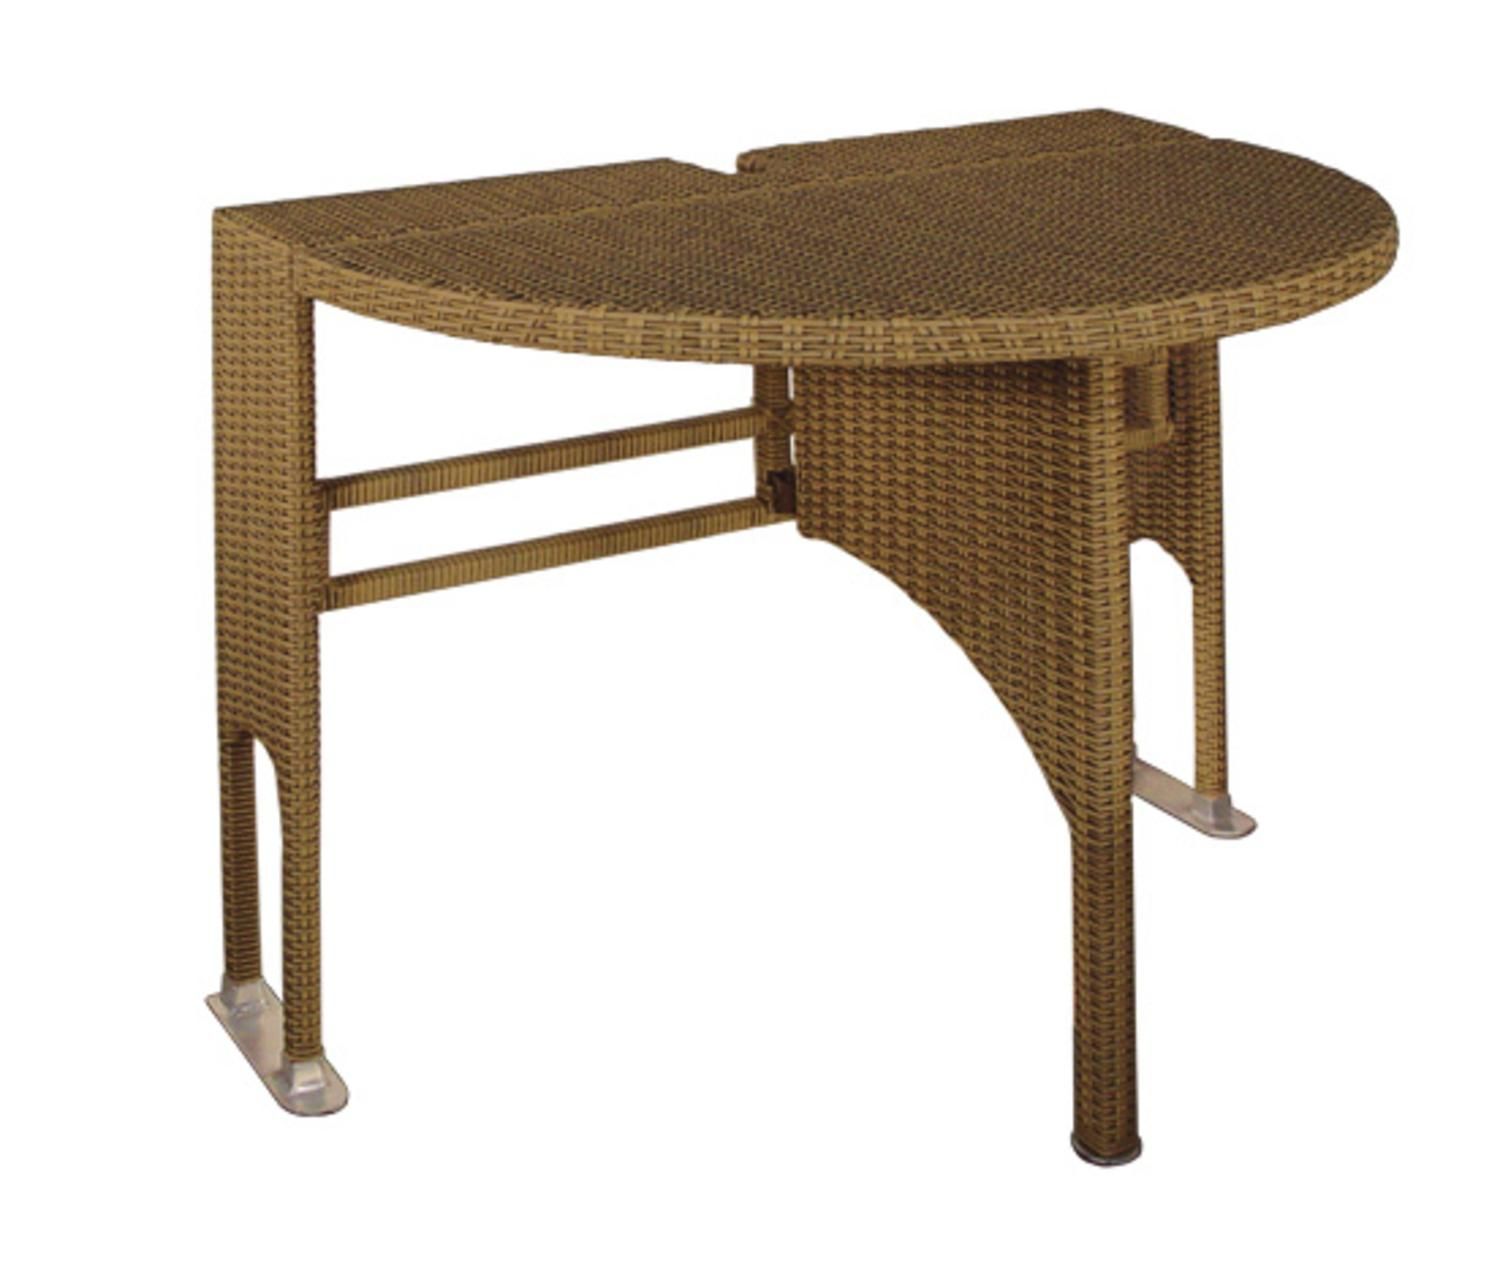 36" Half Round Drop Leaf Gate Leg Coffee Wicker Table In Leaf Round Coffee Tables (View 11 of 15)